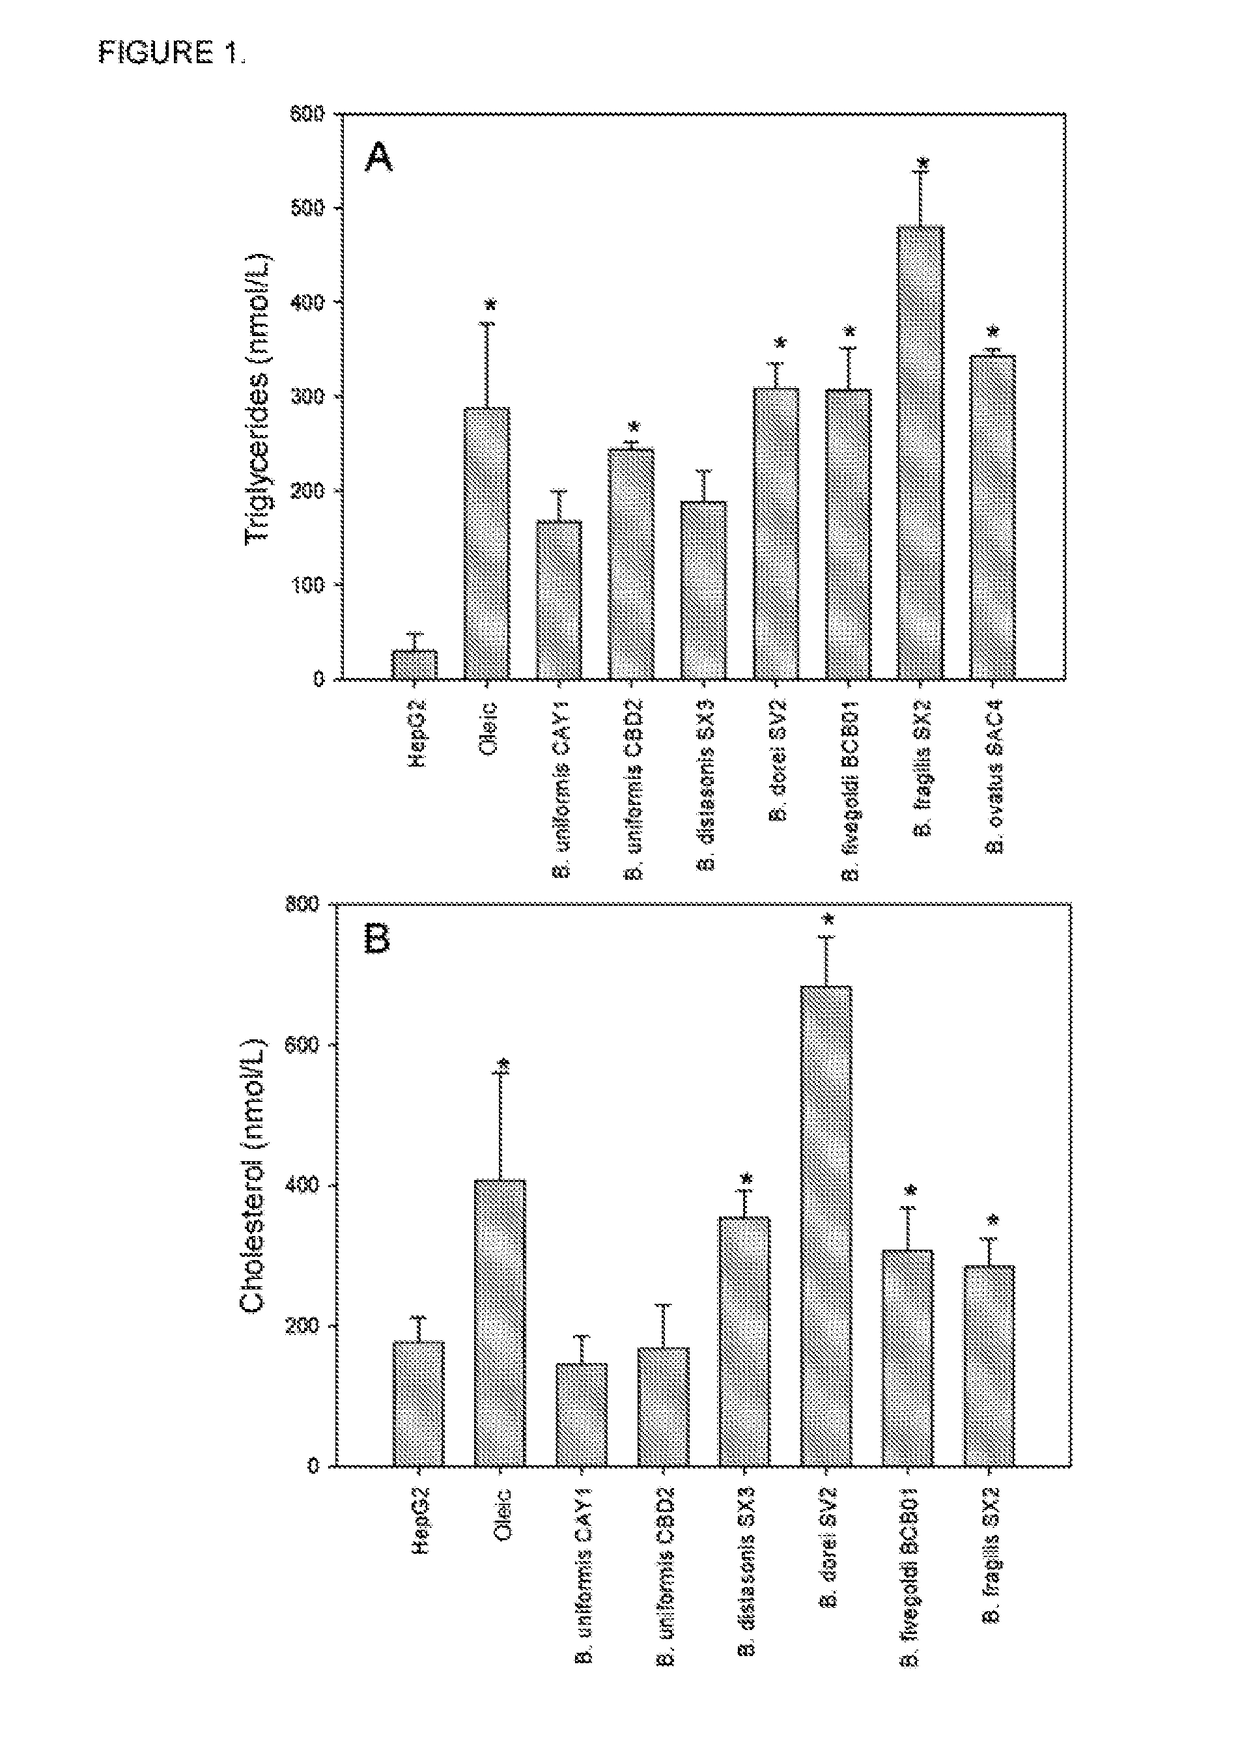 Bacteroides CECT 7771 and the Use Thereof in the Prevention and Treatment of Excess Weight, Obesity and Metabolic and Immunological Alterations